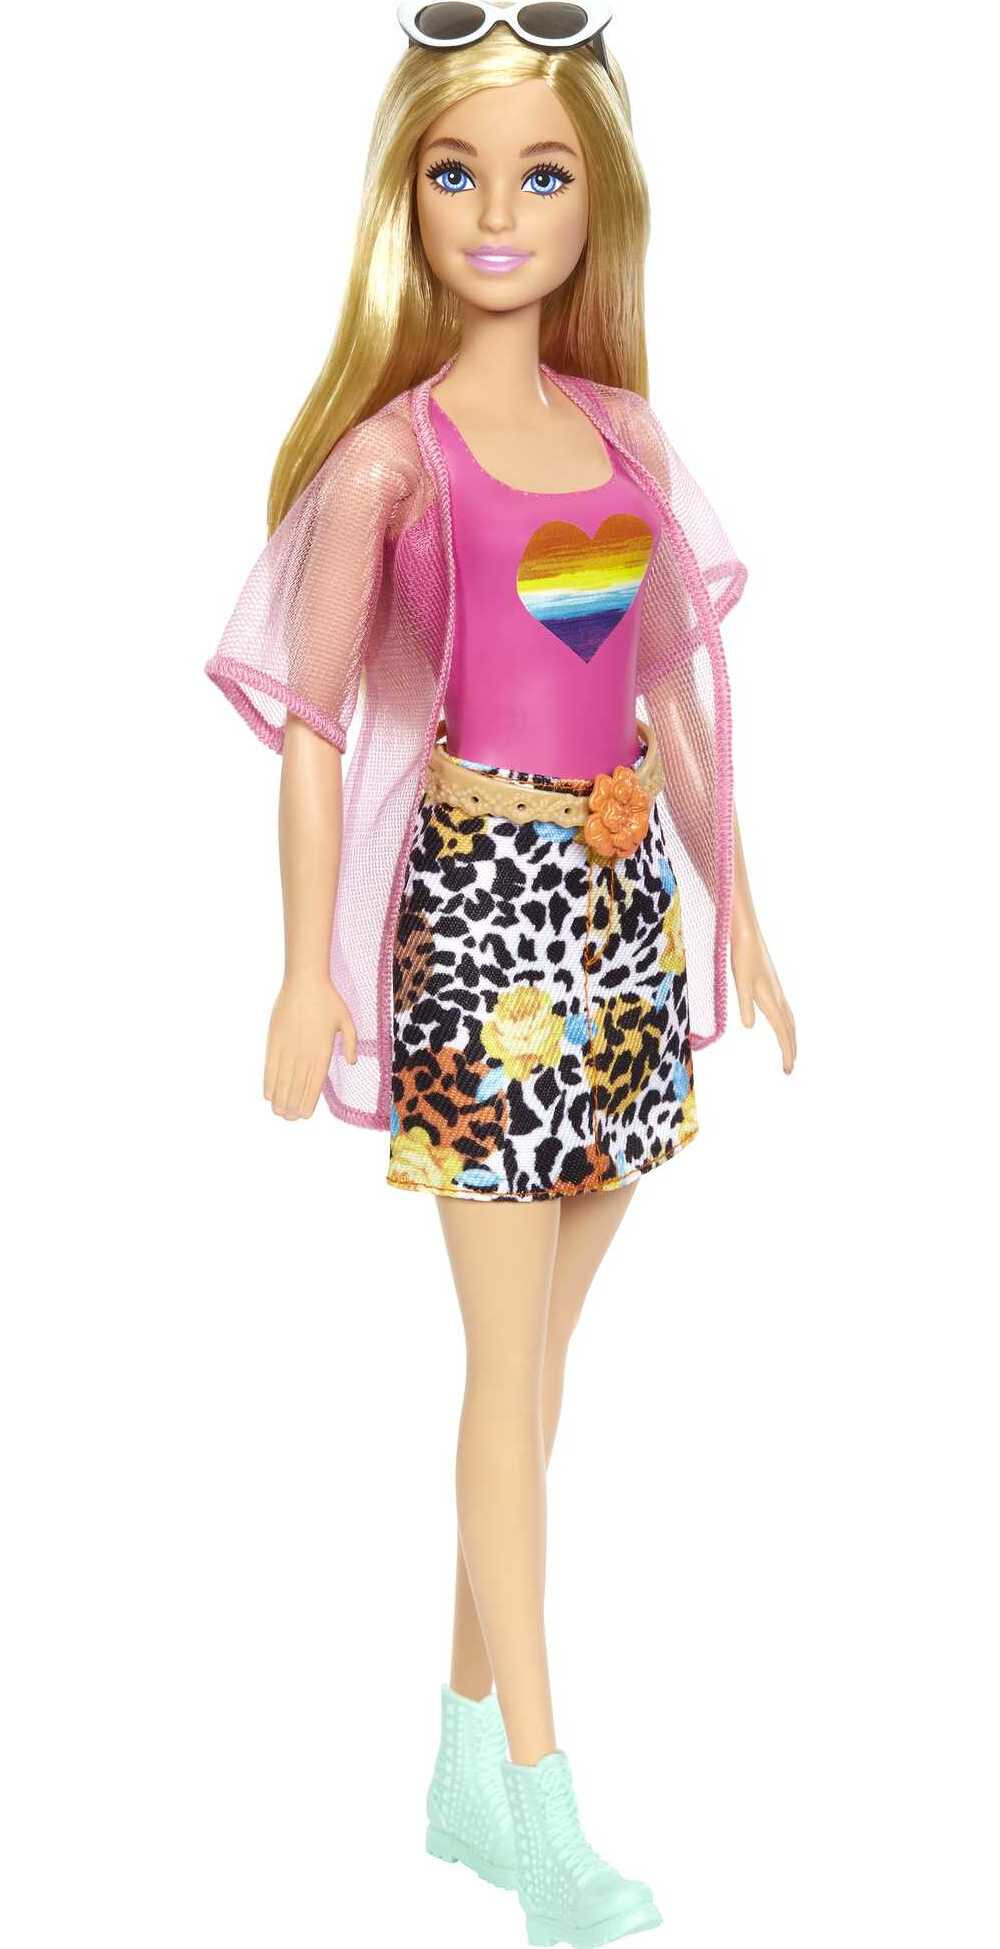 Barbie Doll with 19-Piece Fashion Pack, Clothes & Accessories for 7 Outfits, Blonde Hair - image 3 of 6